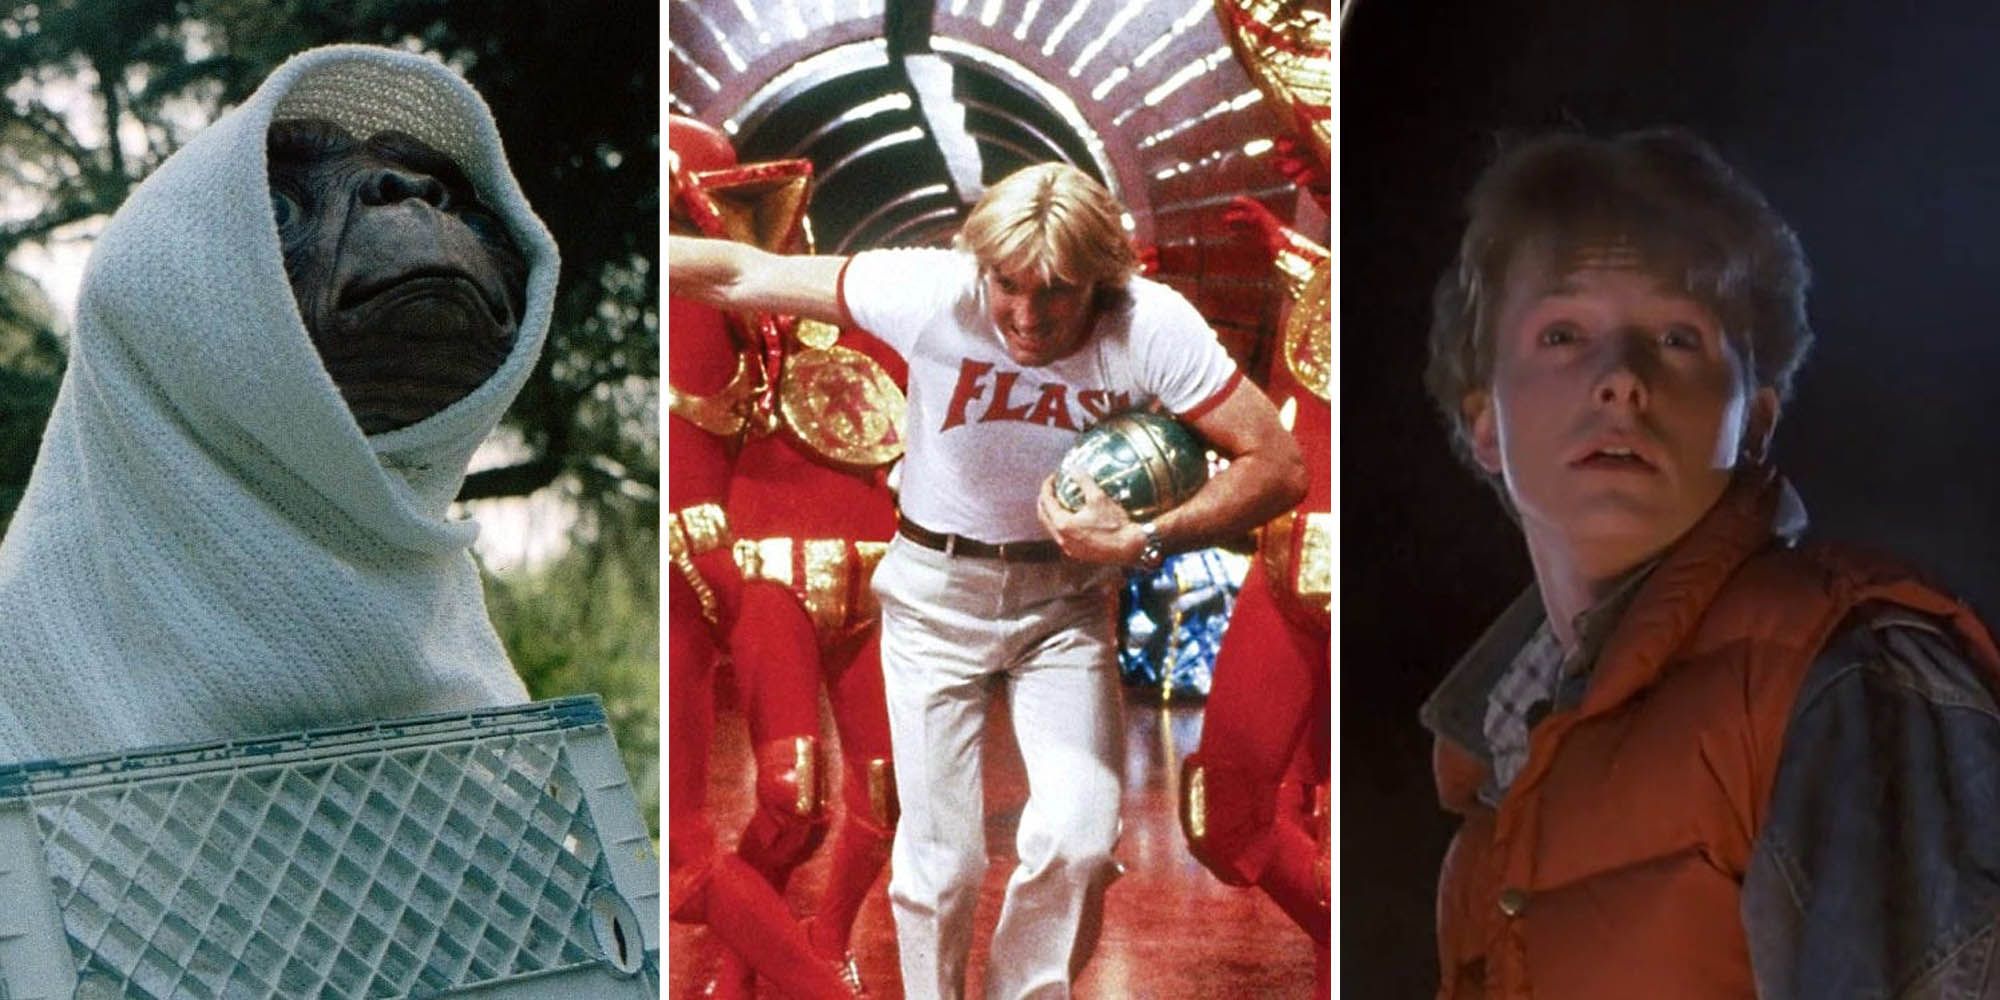 ET, Flash Gordon, and Marty McFly